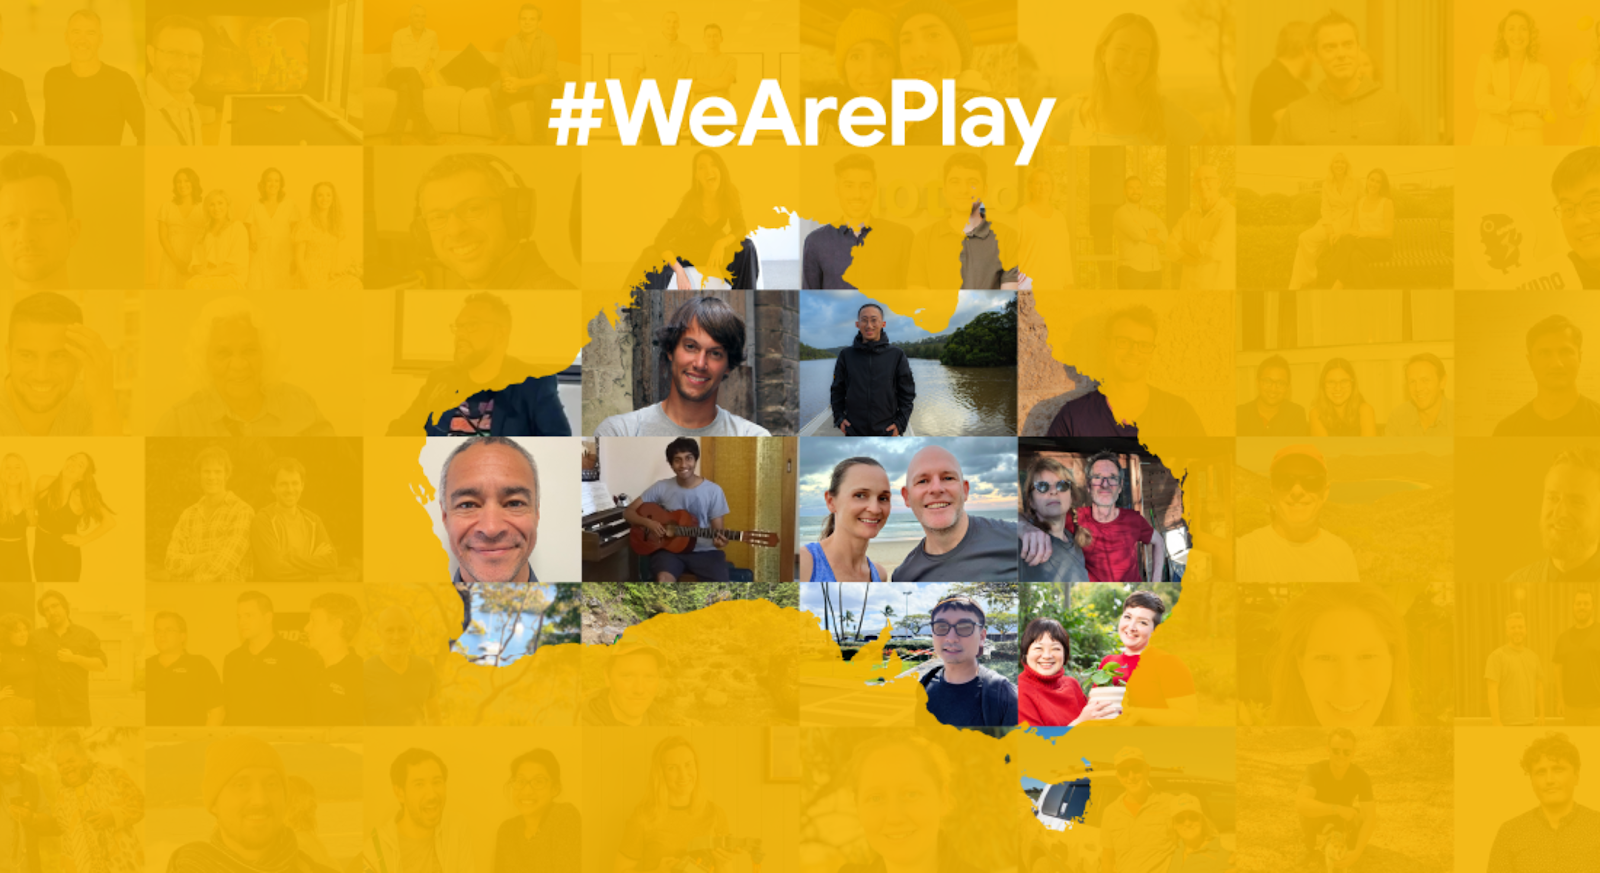 #WeArePlay | Meet the people creating apps and games in Australia